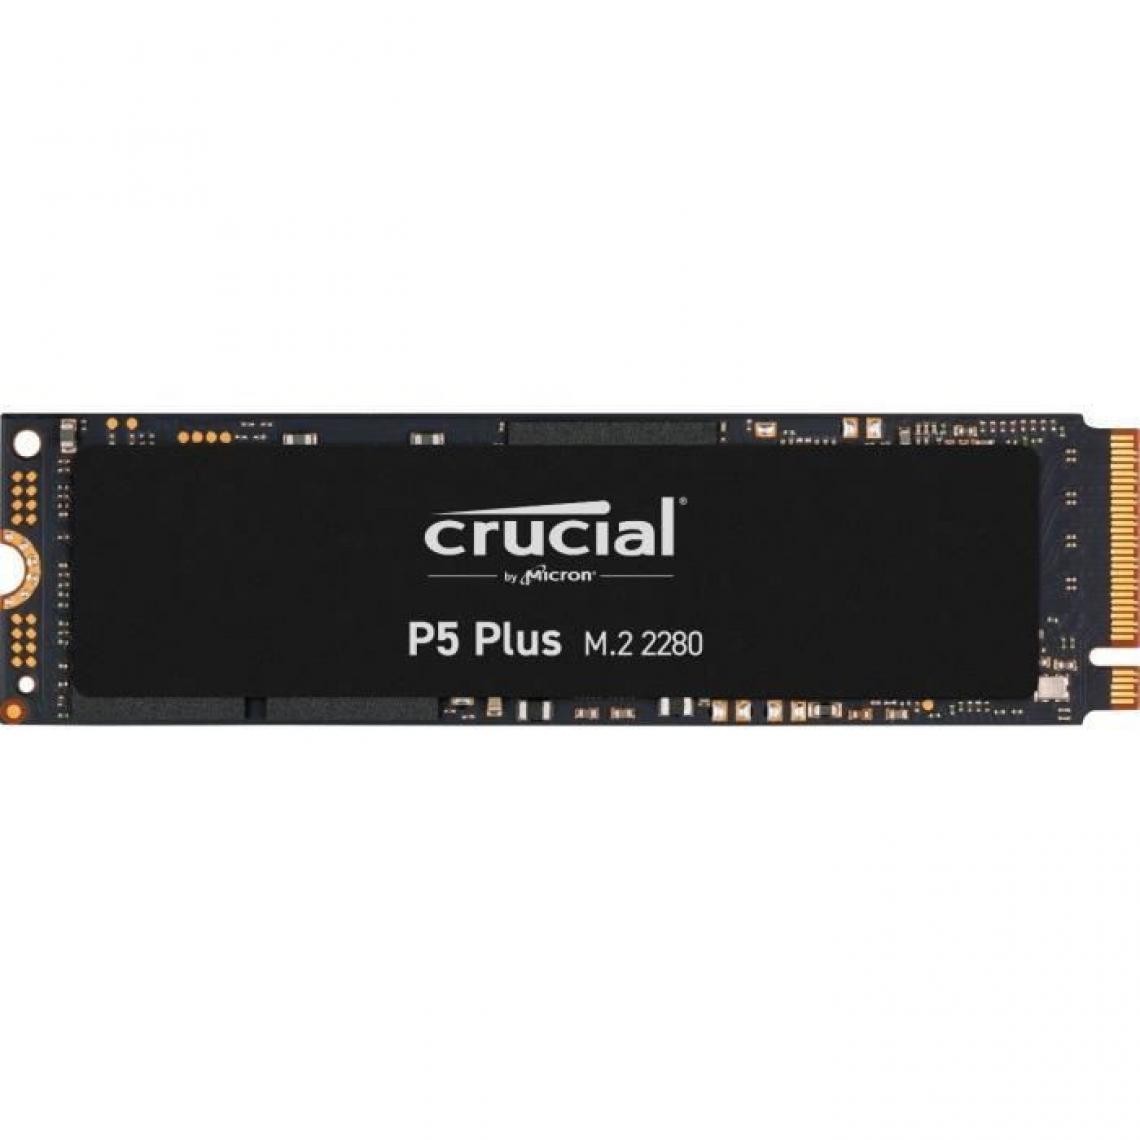 Crucial - CRUCIAL - SSD Interne - P5 Plus - 1To - M.2 Nvme (CT1000P5PSSD8) - Disque Dur interne